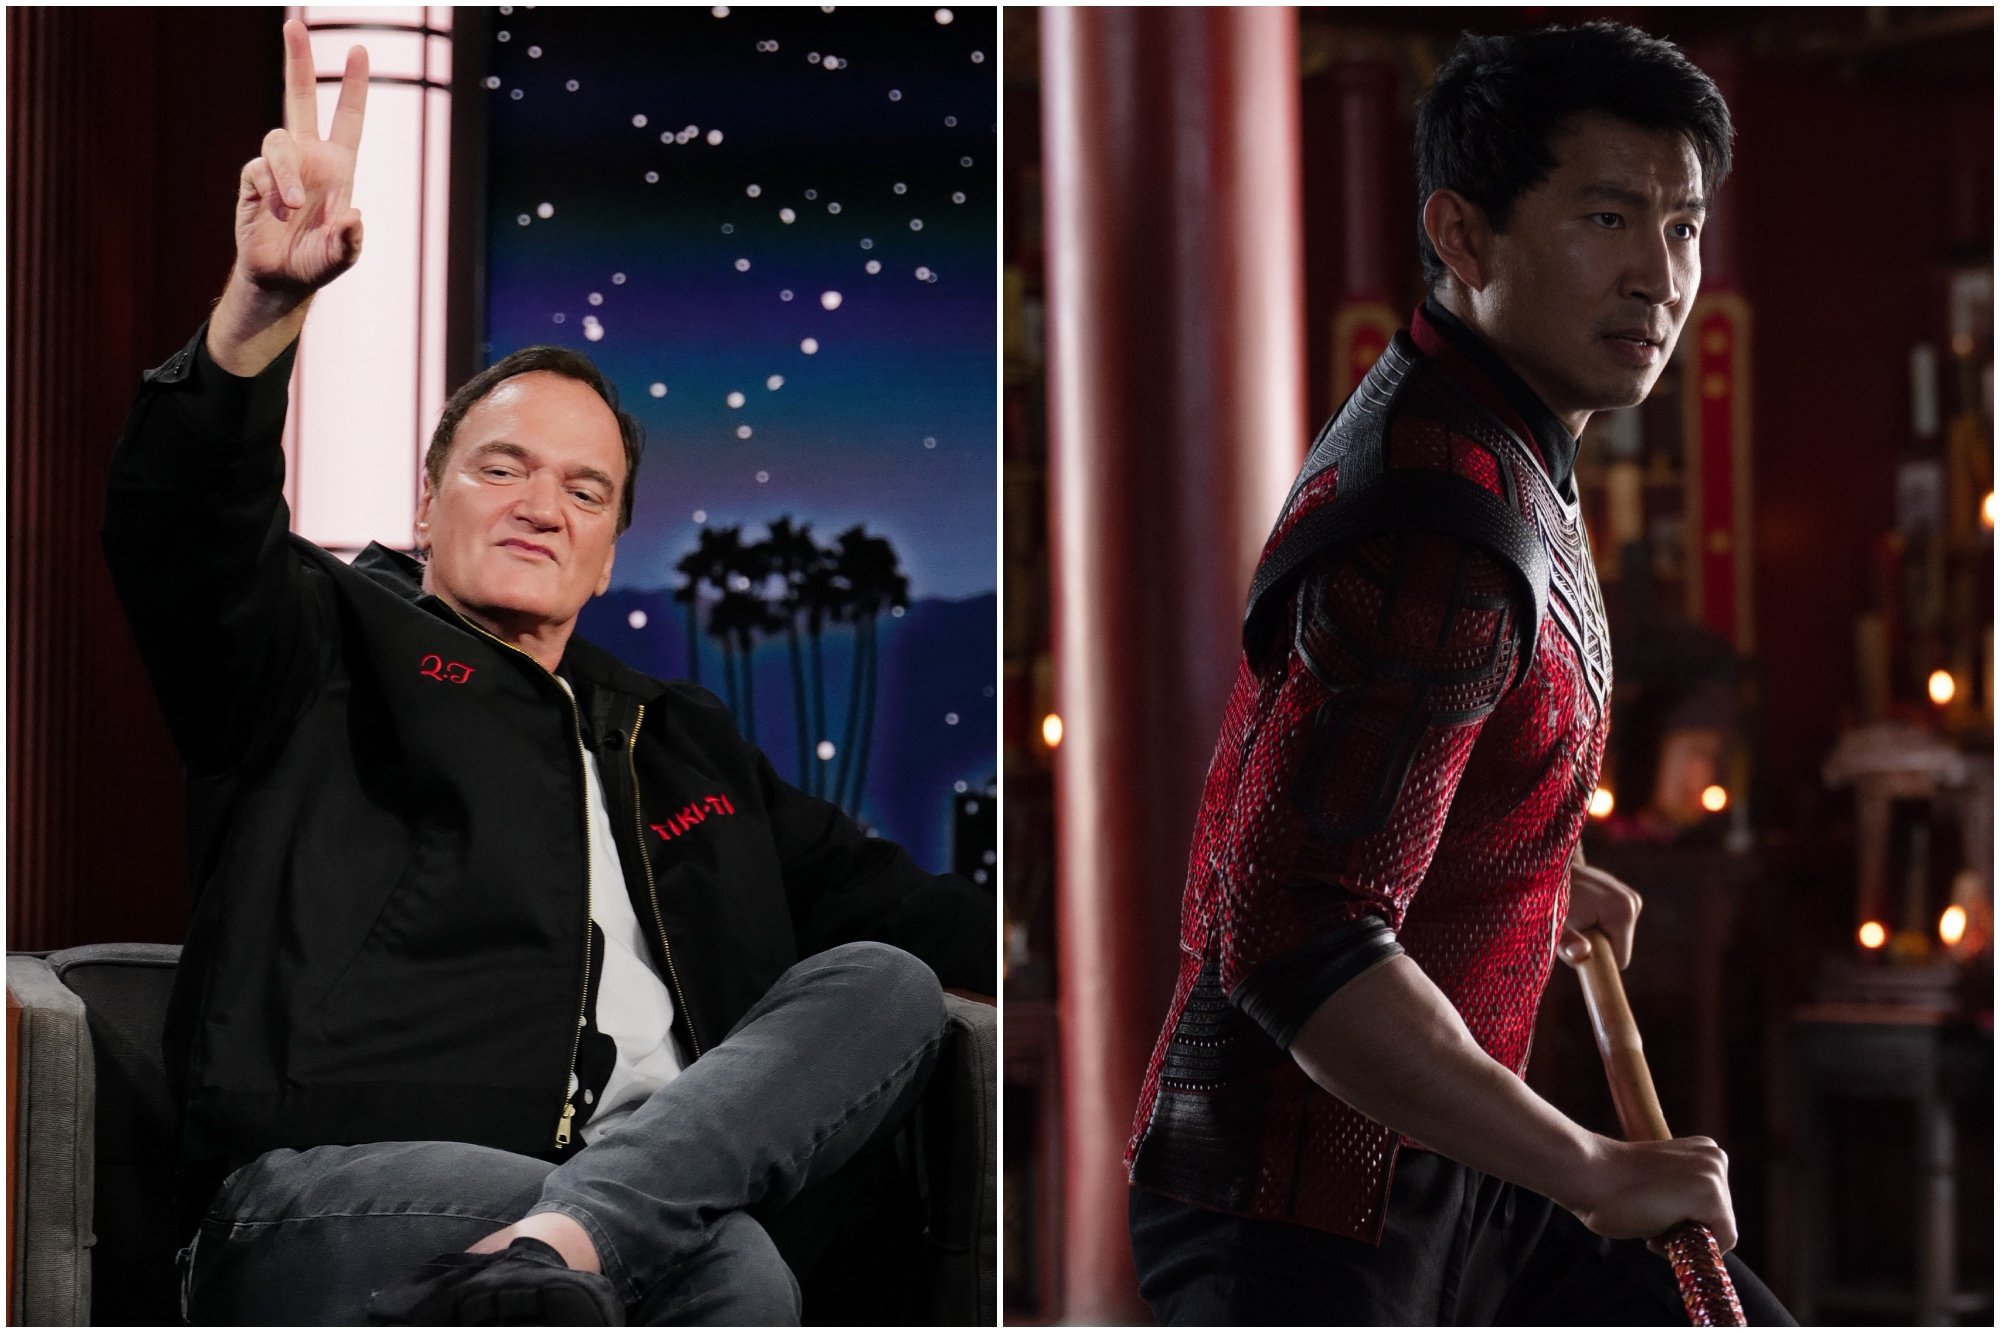 Quentin Tarantino and Marvel actor Simu Liu as Shang-Chi. Tarantino is sitting in a chair with his hand raised up, making a peace sign. Liu is wearing a red and black costume, holding a pole ready to fight.